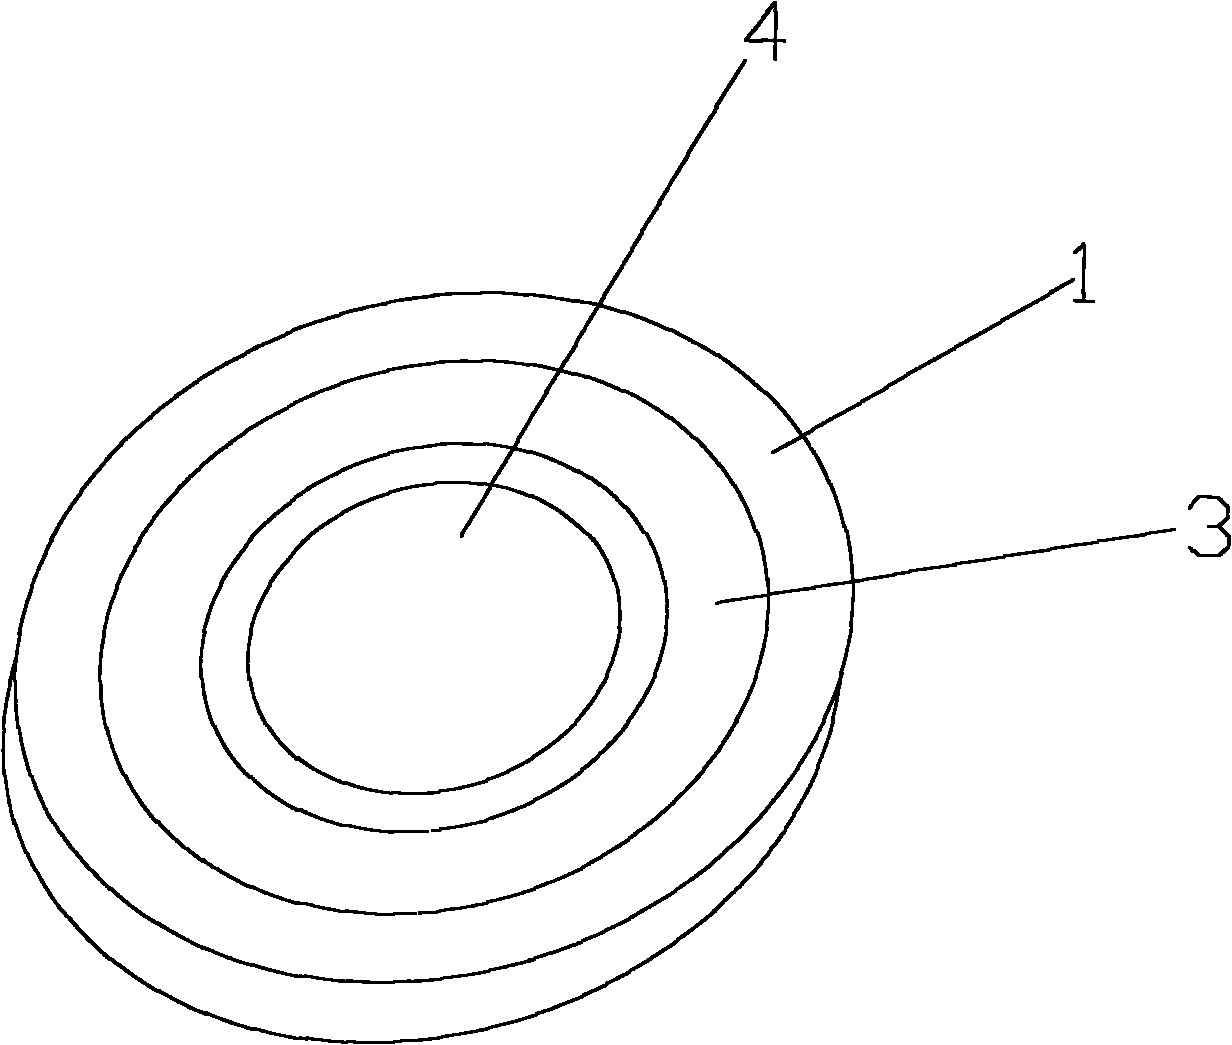 Novel seal washer structure